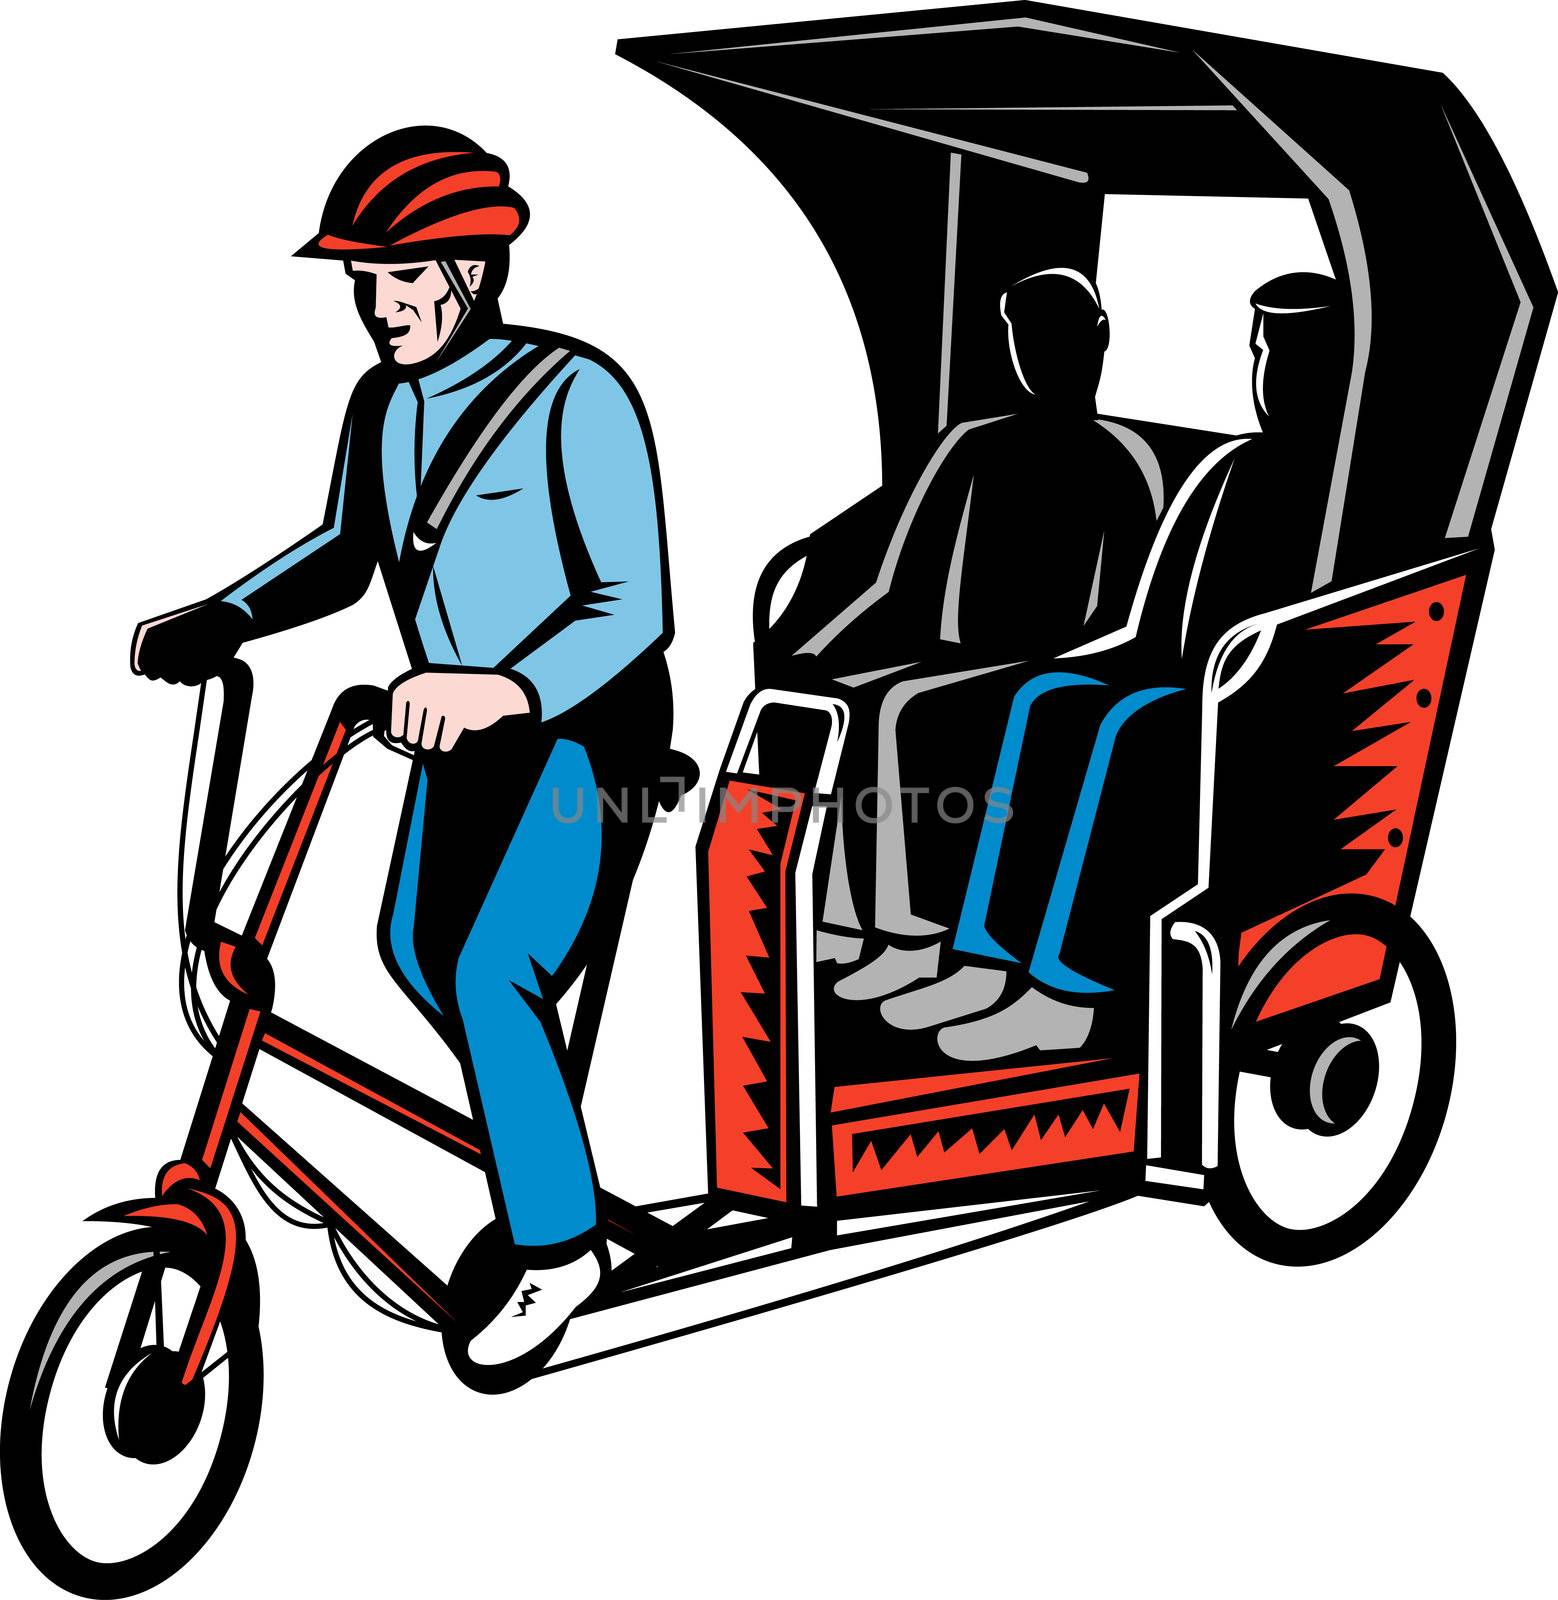 Cycle Rickshaw with driver and passenger by patrimonio